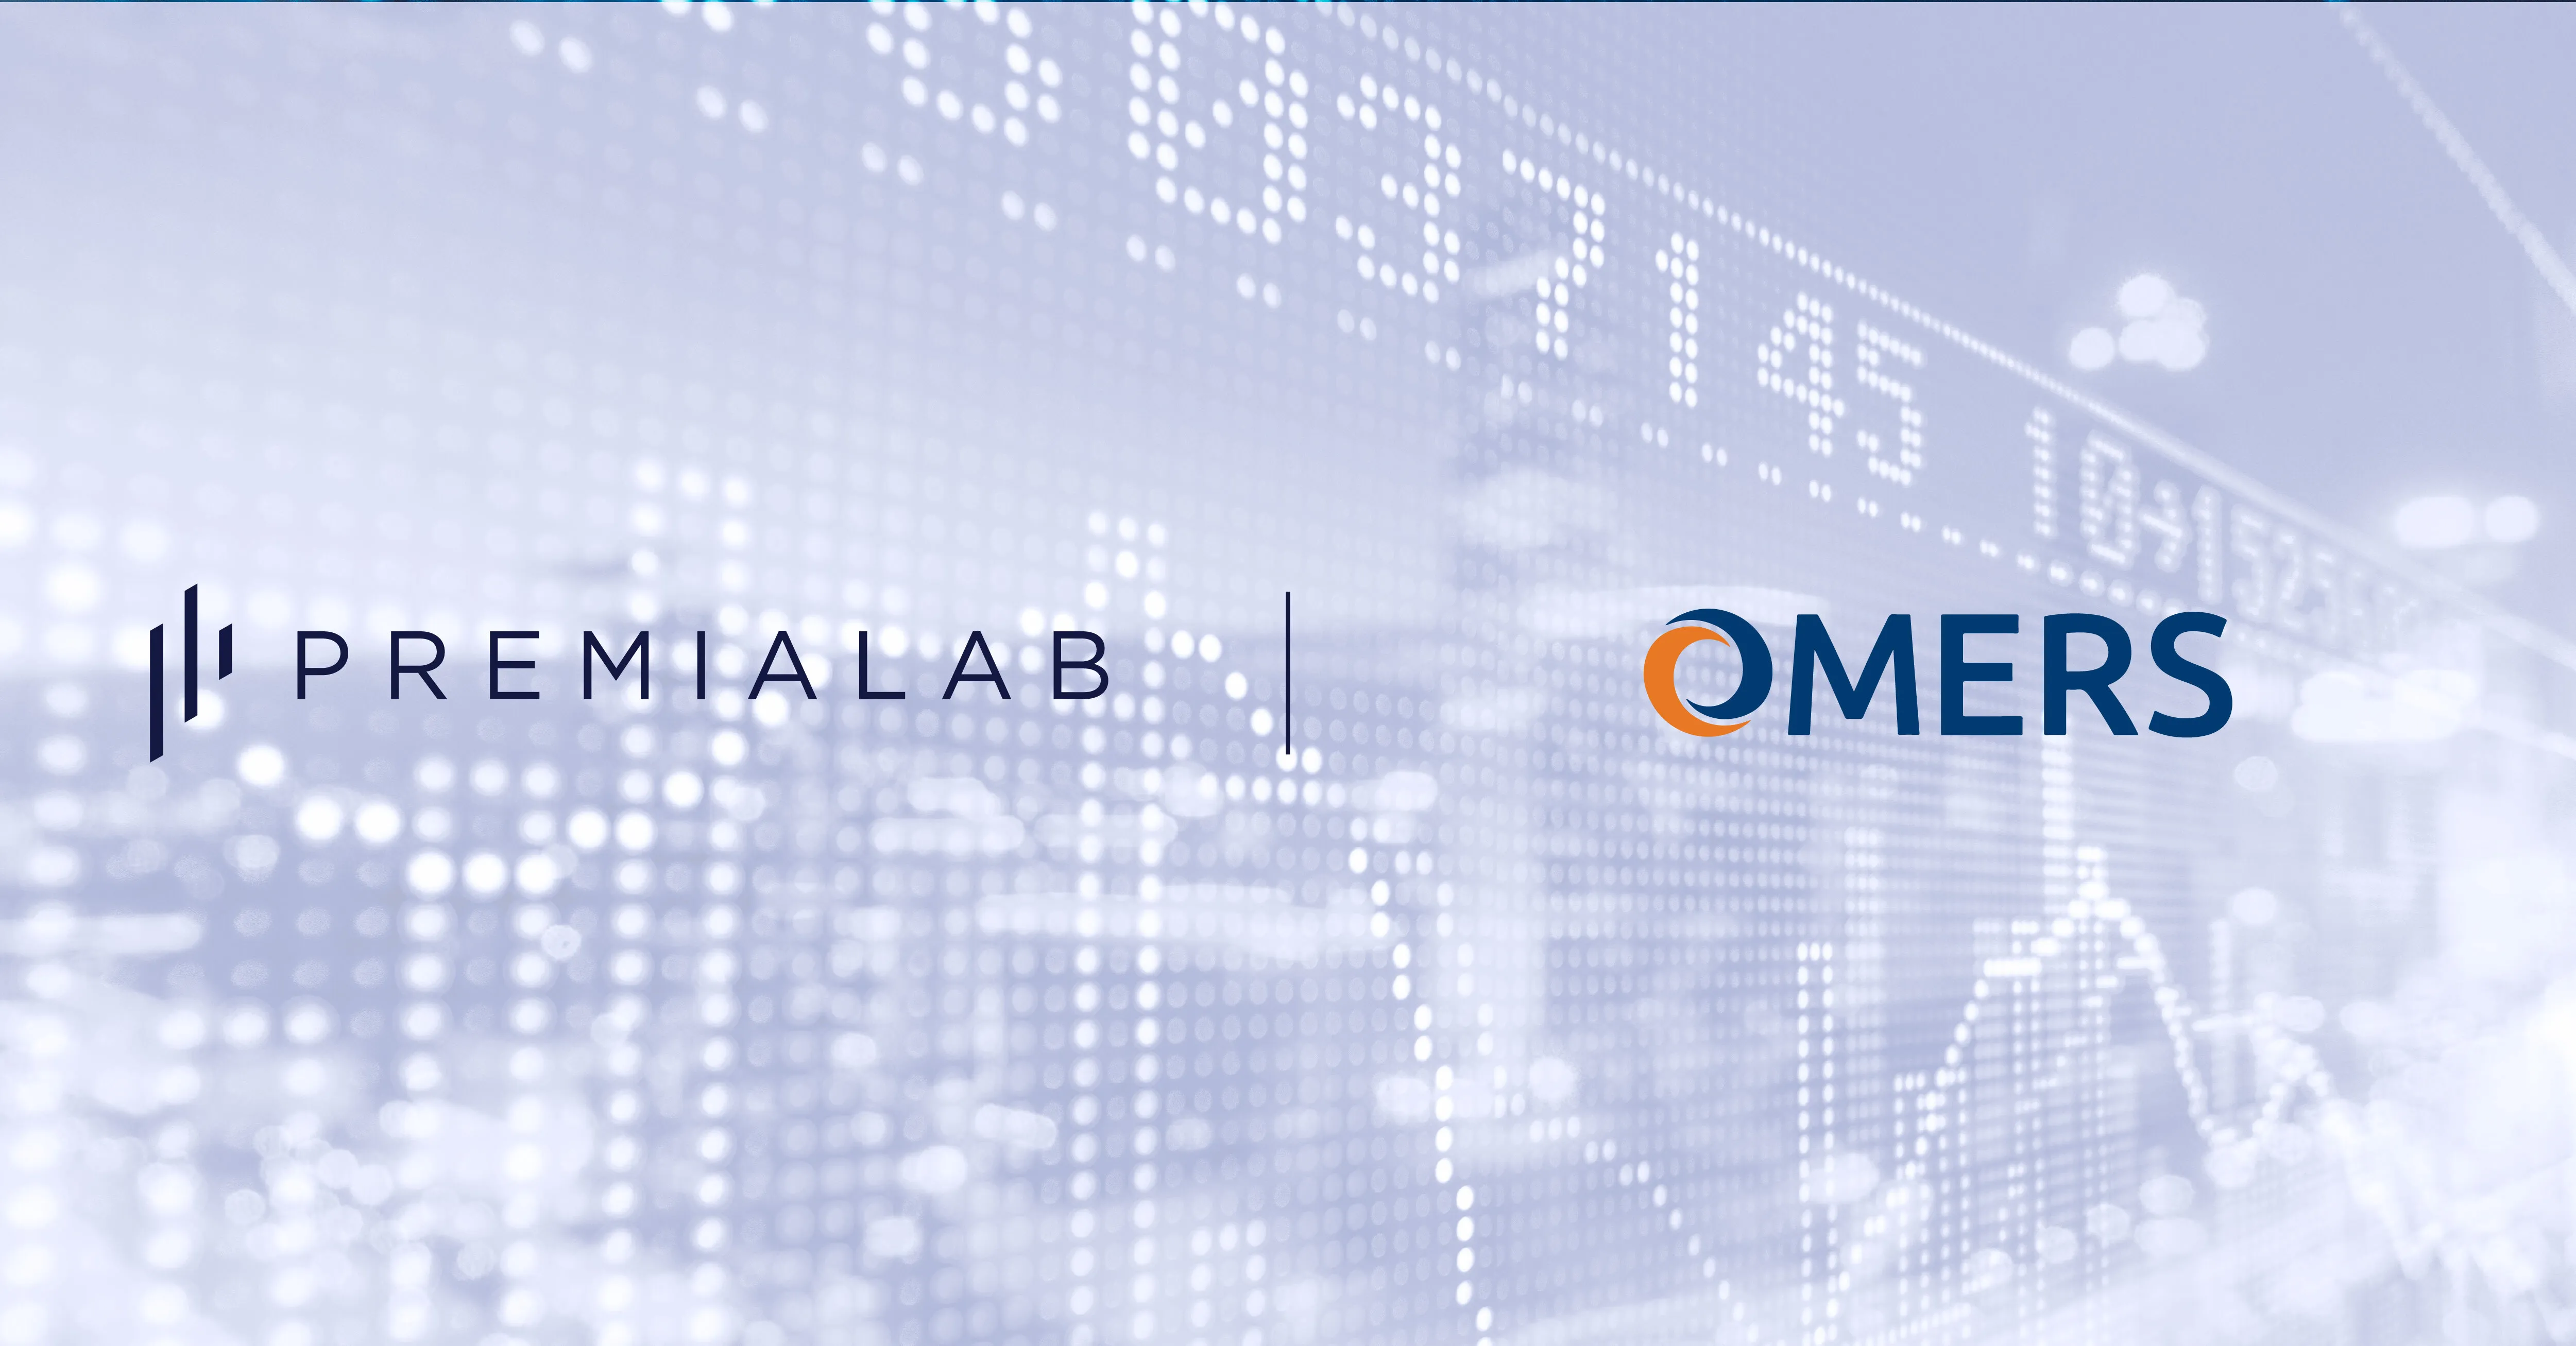 Top10 Largest Canadian Pension Fund OMERS Partners with Premialab